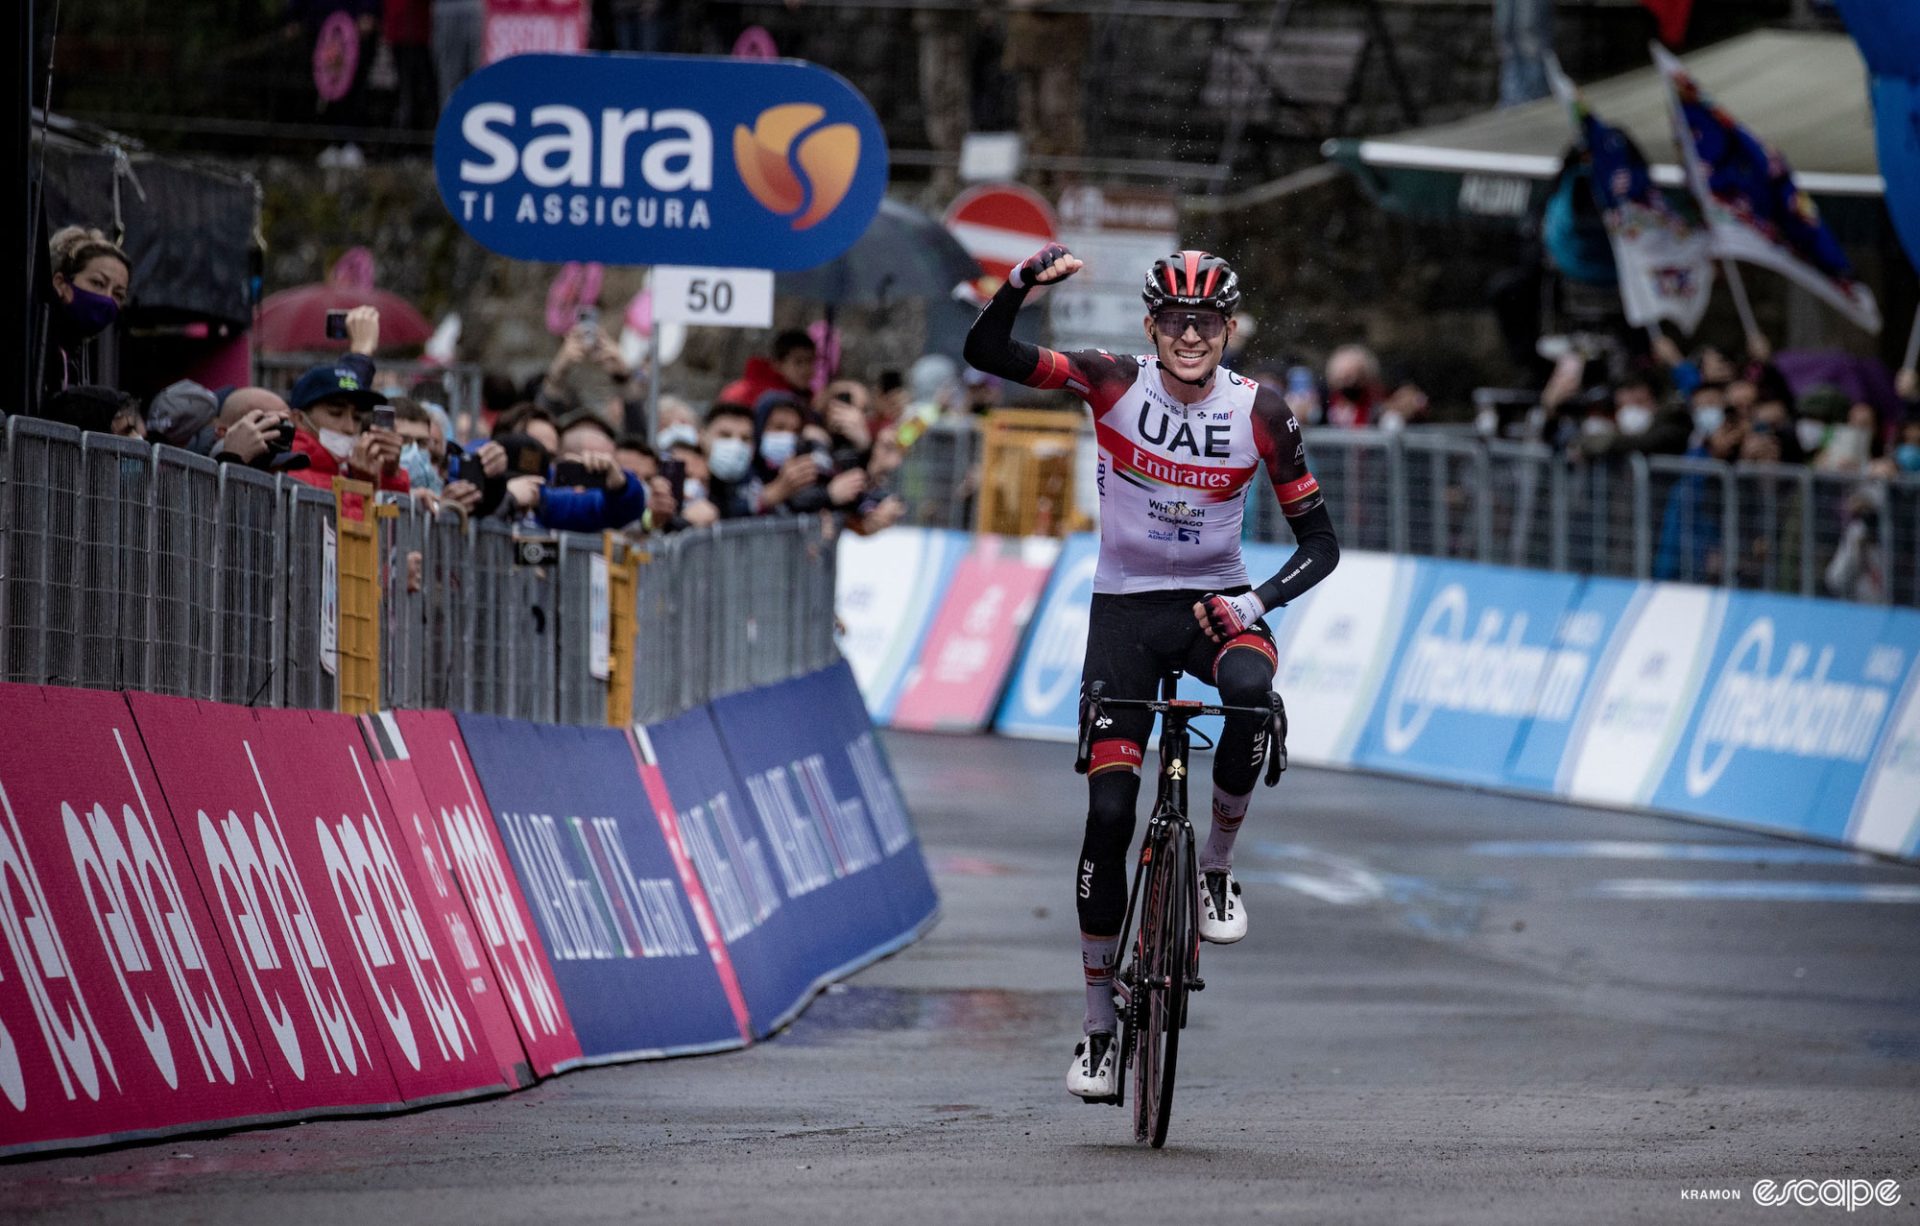 Joe Dombrowski sits up and punches the air as he crosses the finish line to win a stage of the 2021 Giro d'Italia.